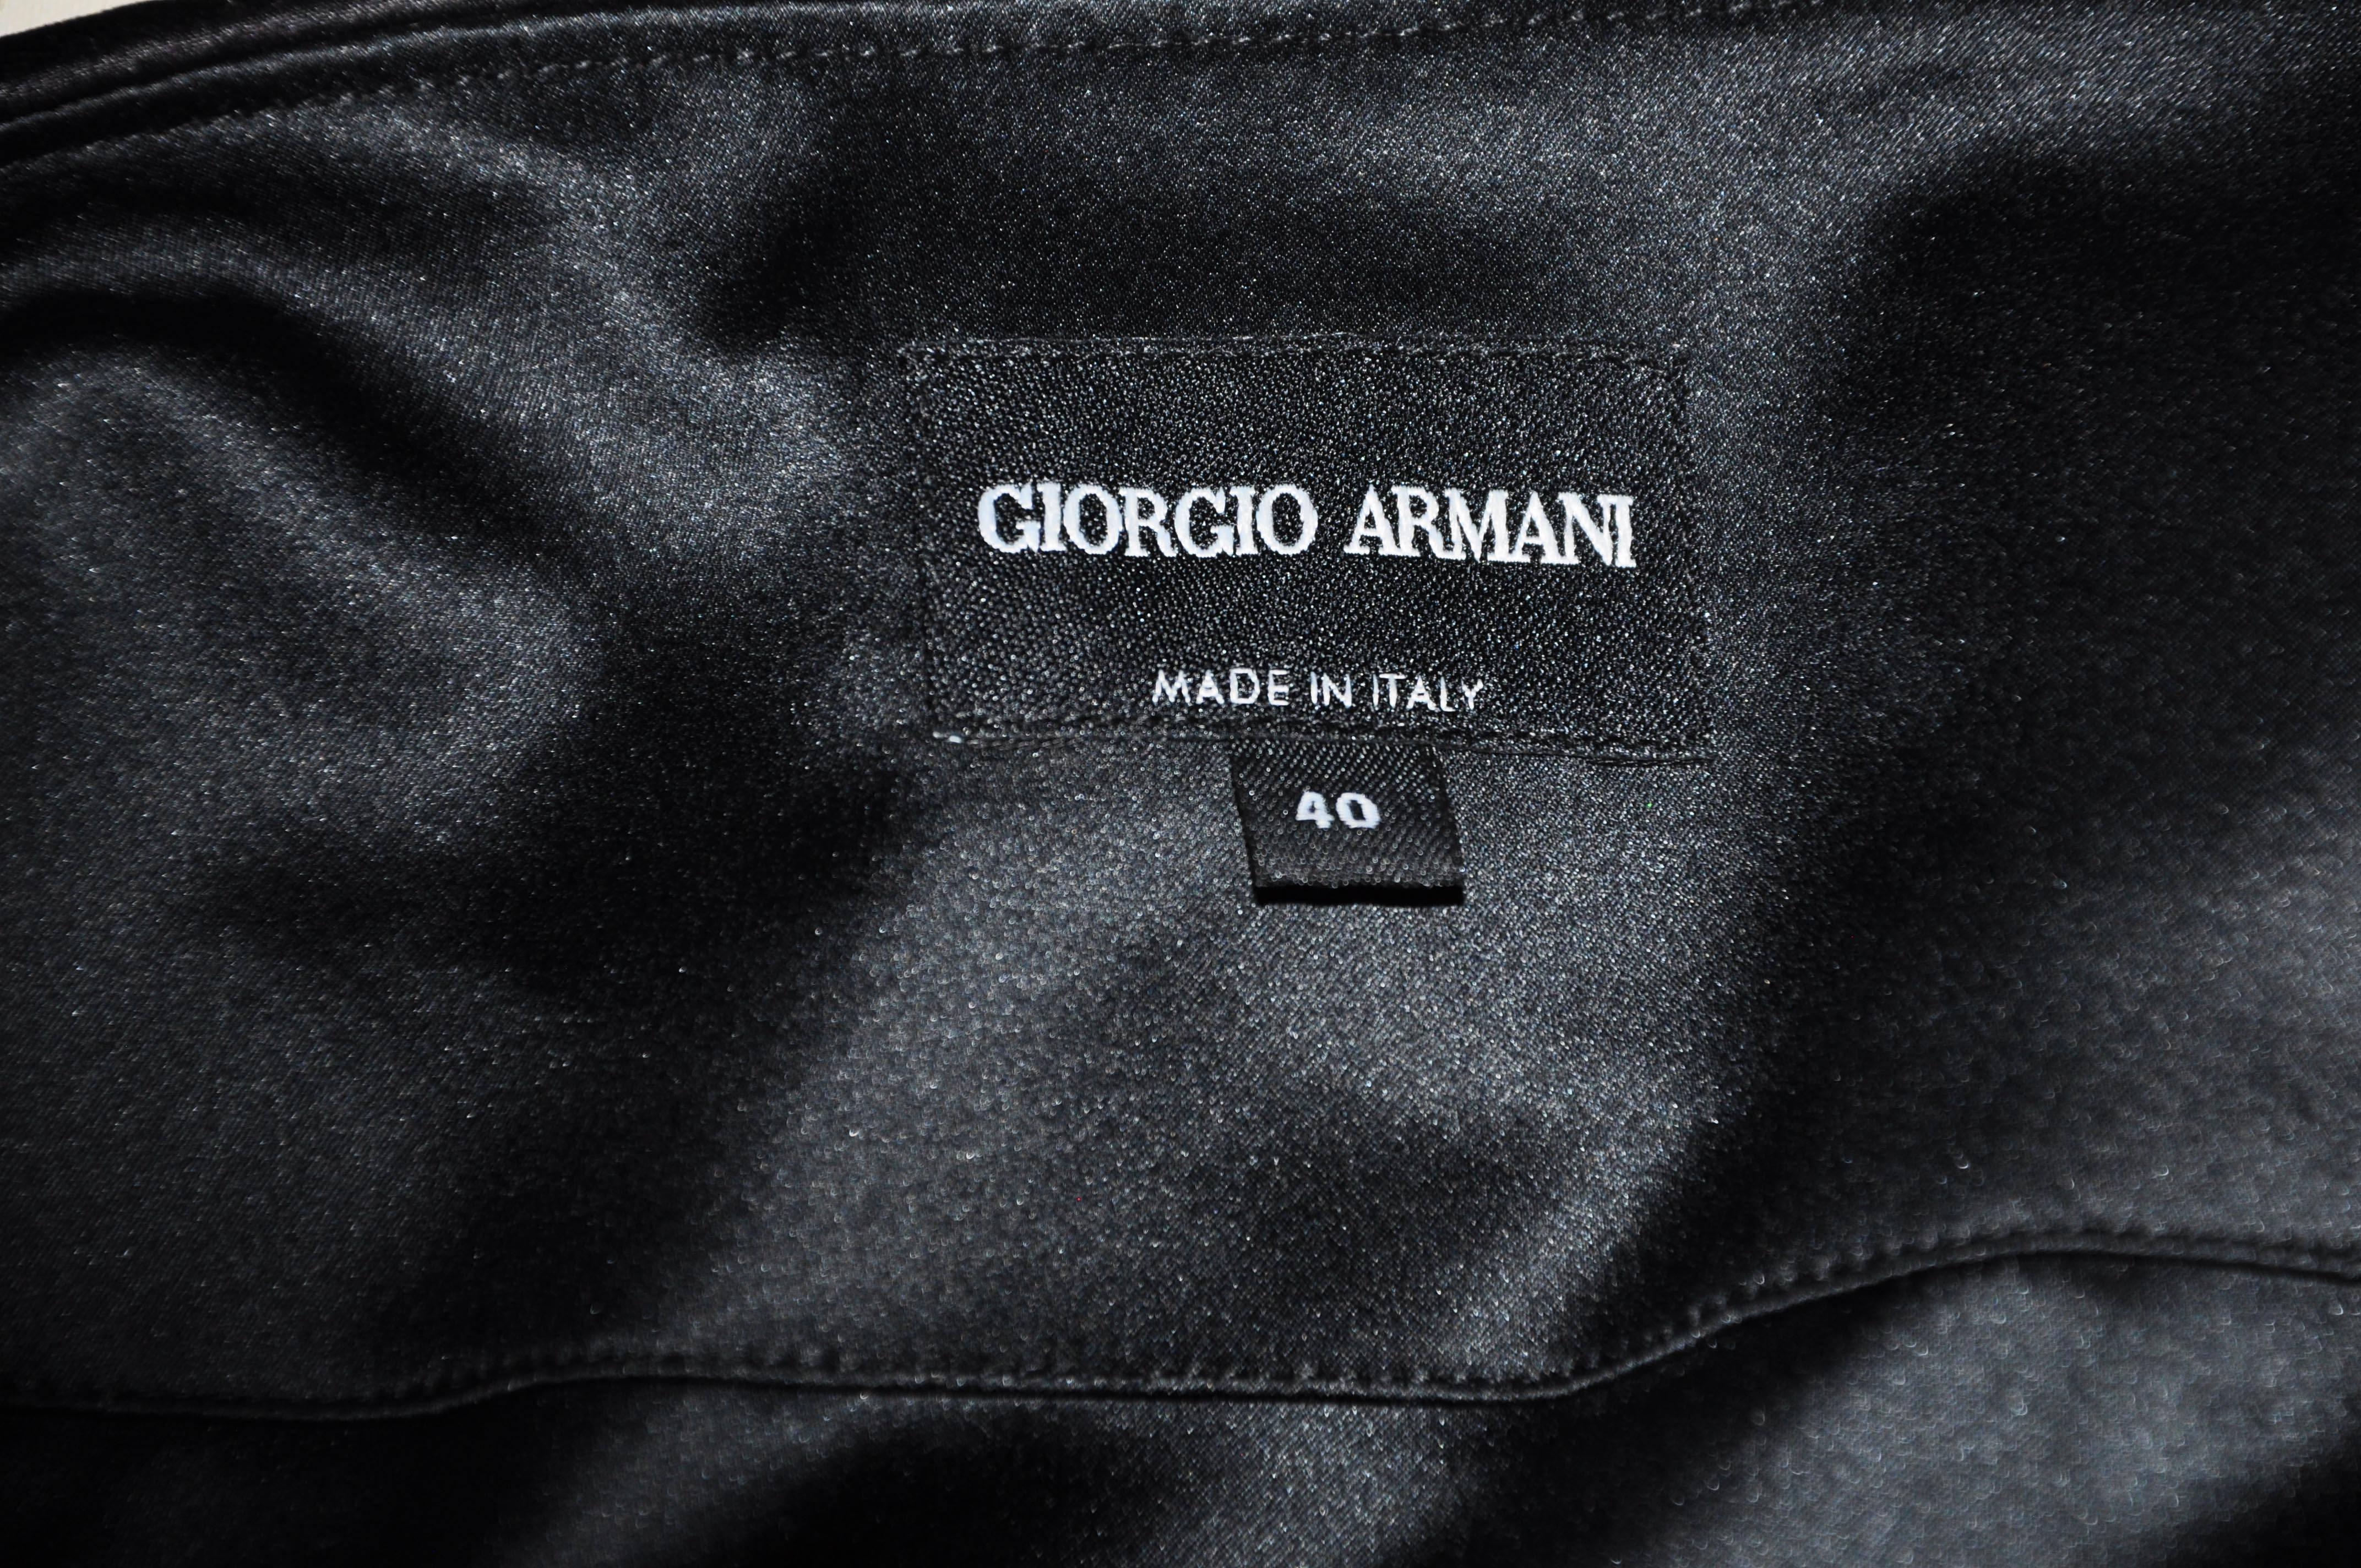 Giorgio Armani Classic Black Velvet Cocktail Skirt Suit  In Excellent Condition For Sale In Hong Kong, Hong Kong